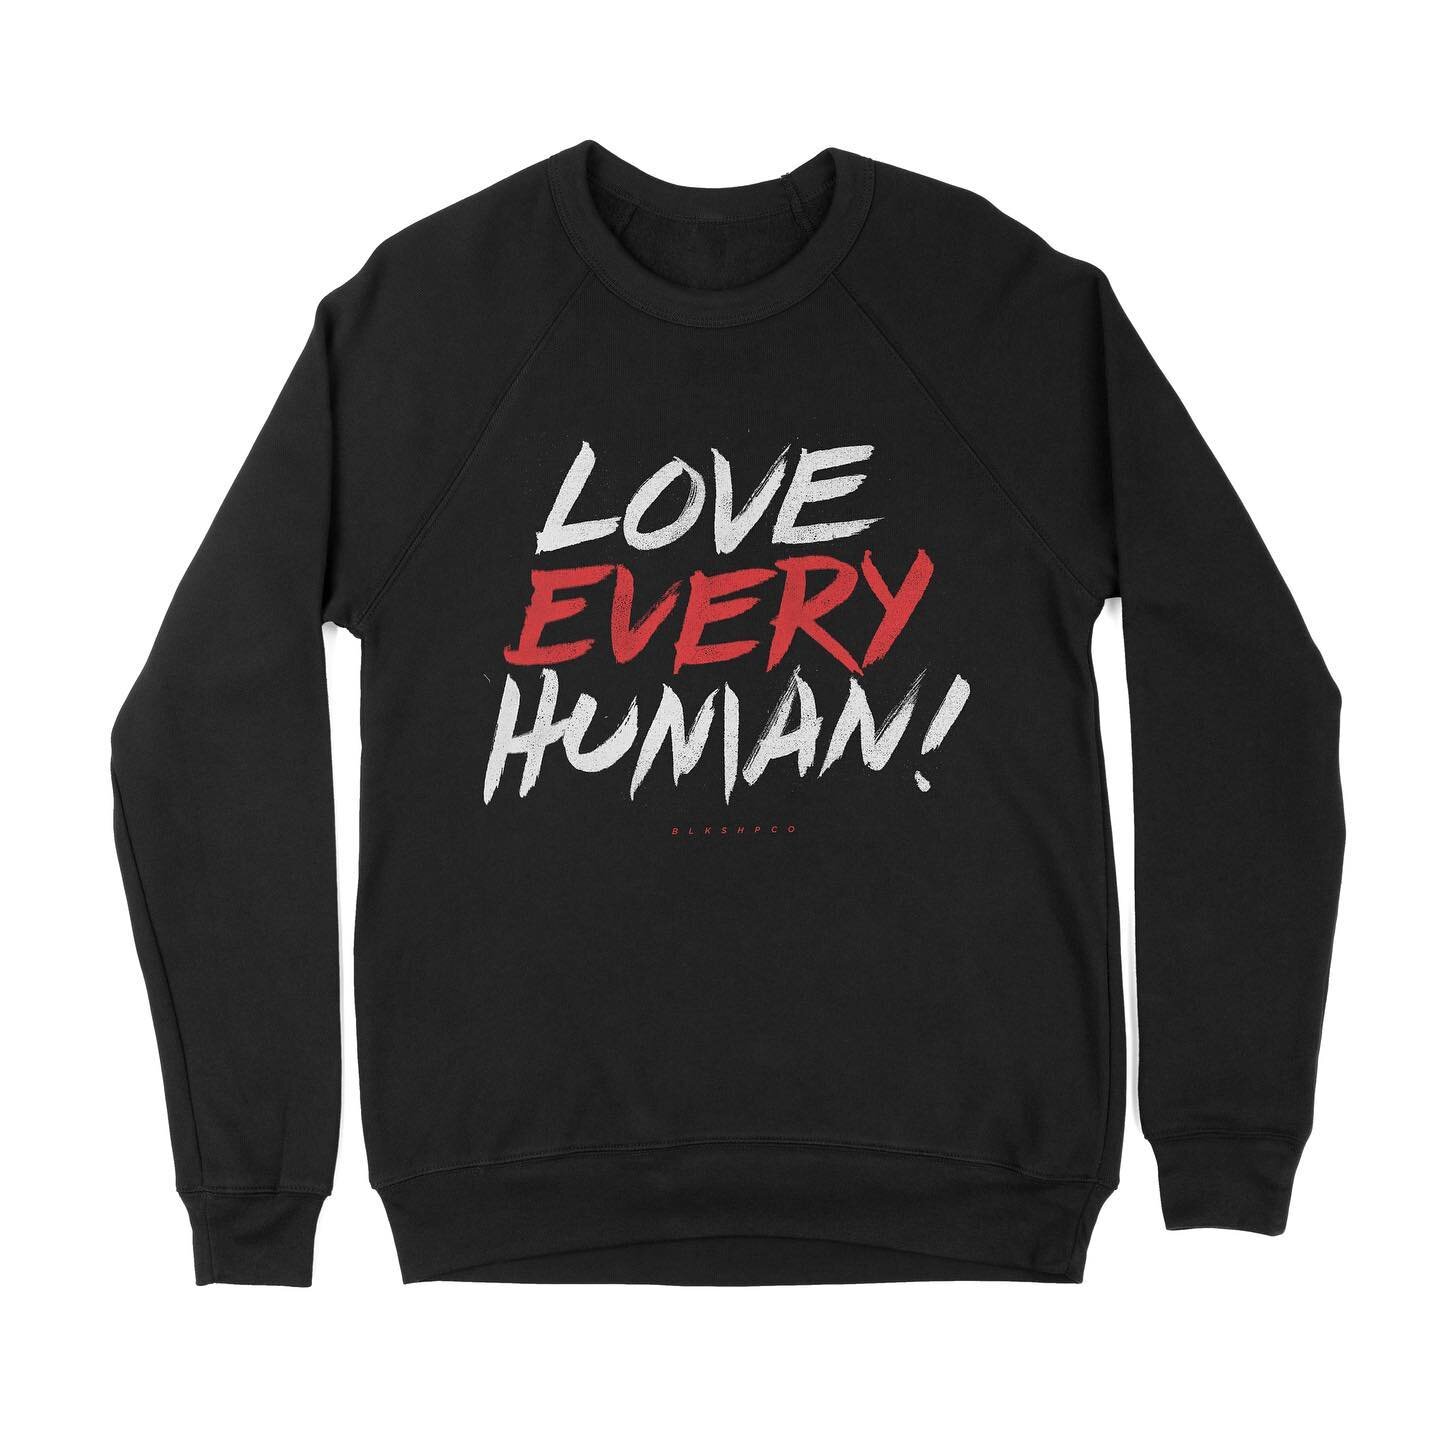 We&rsquo;ve got a Cyber Monday sale happening right now! 25% off the entire store! No code required! Sales are rare for us so you definitely don&rsquo;t want to miss out. Also, we&rsquo;re bringing back one of our favorite designs &ldquo;Love Every H